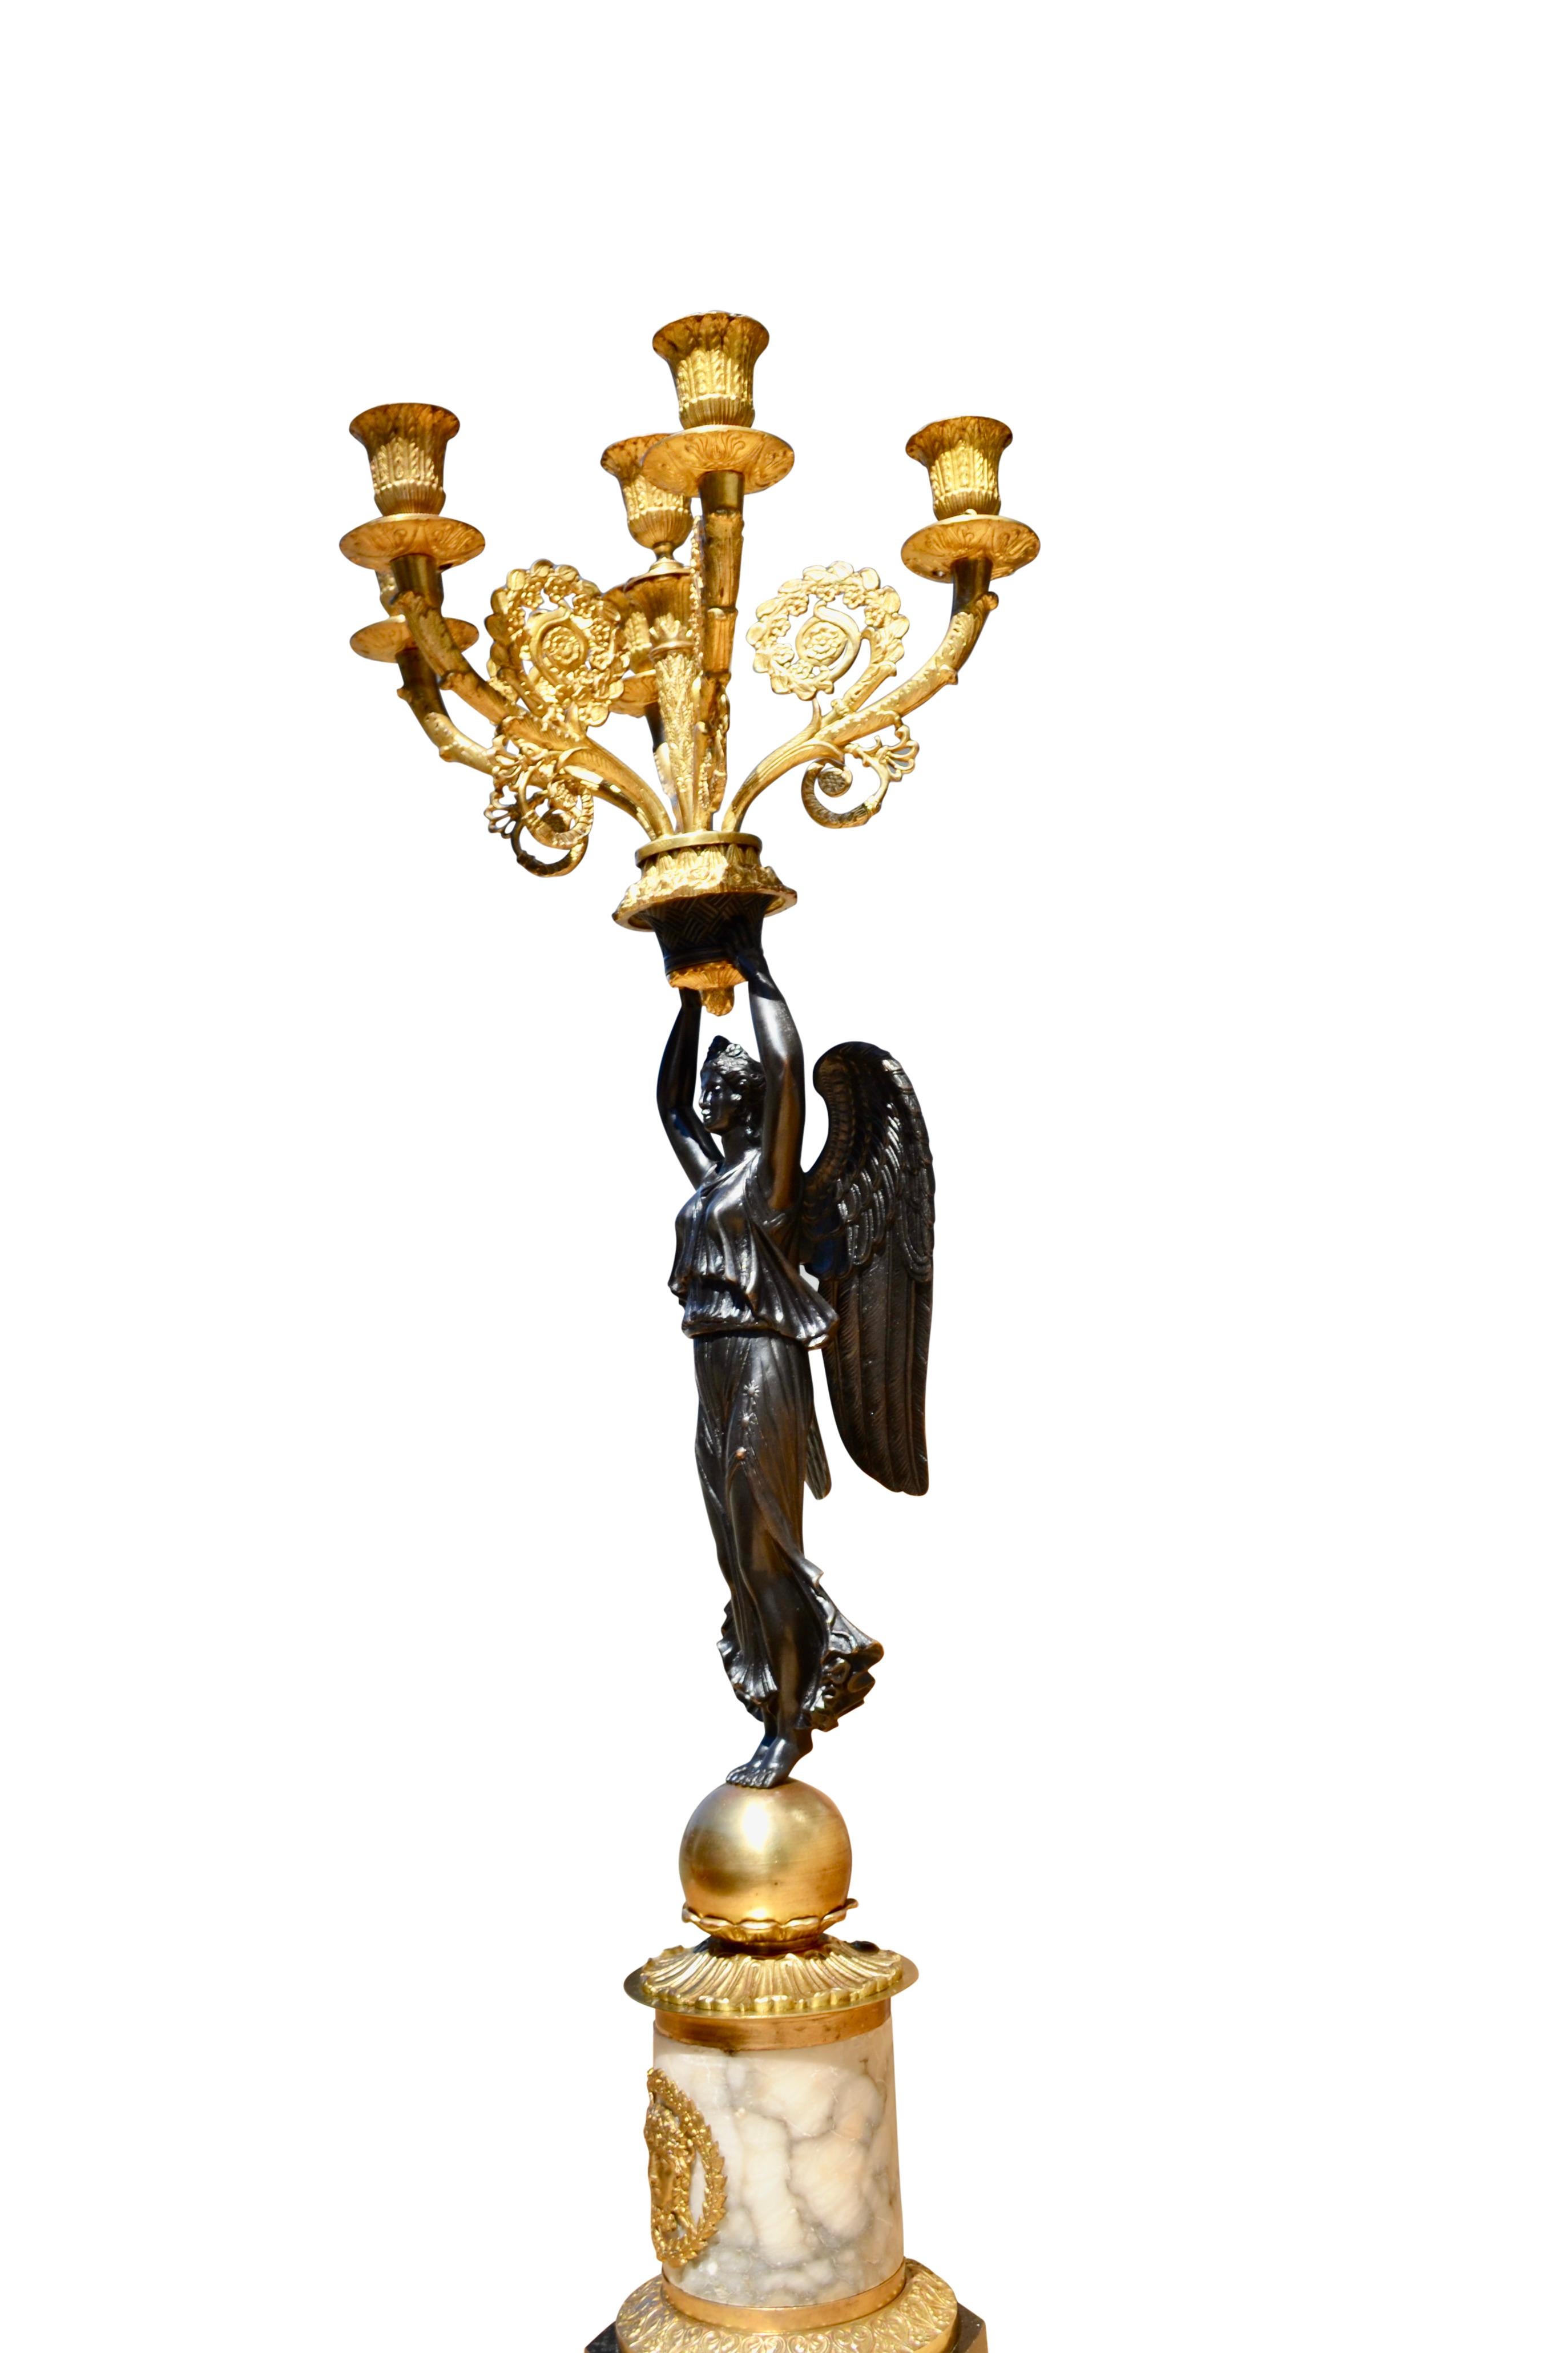 Single French Empire Style Patinated  and Gilt Bronze Winged Victory Candelabra For Sale 3